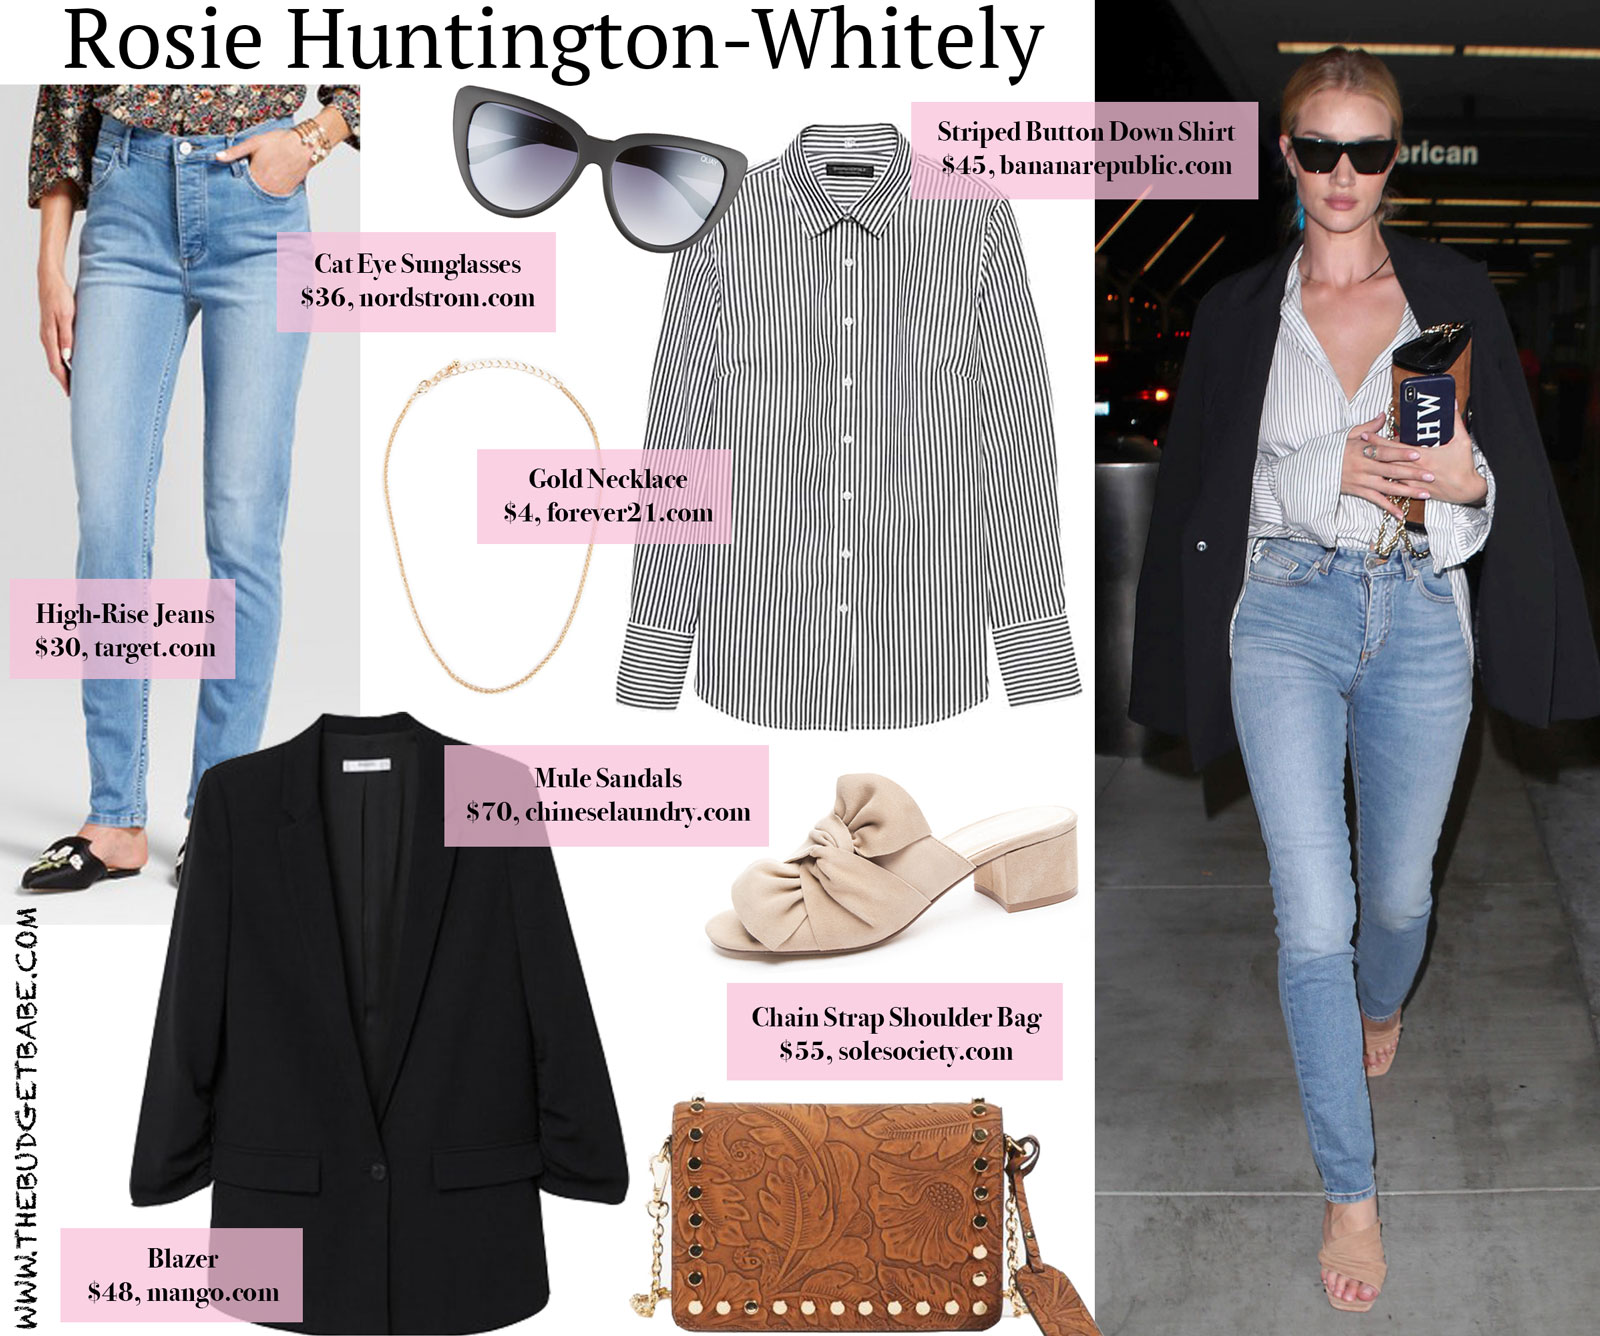 Rosie Huntington-Whitely Striped Button Down and Black Blazer Look for Less